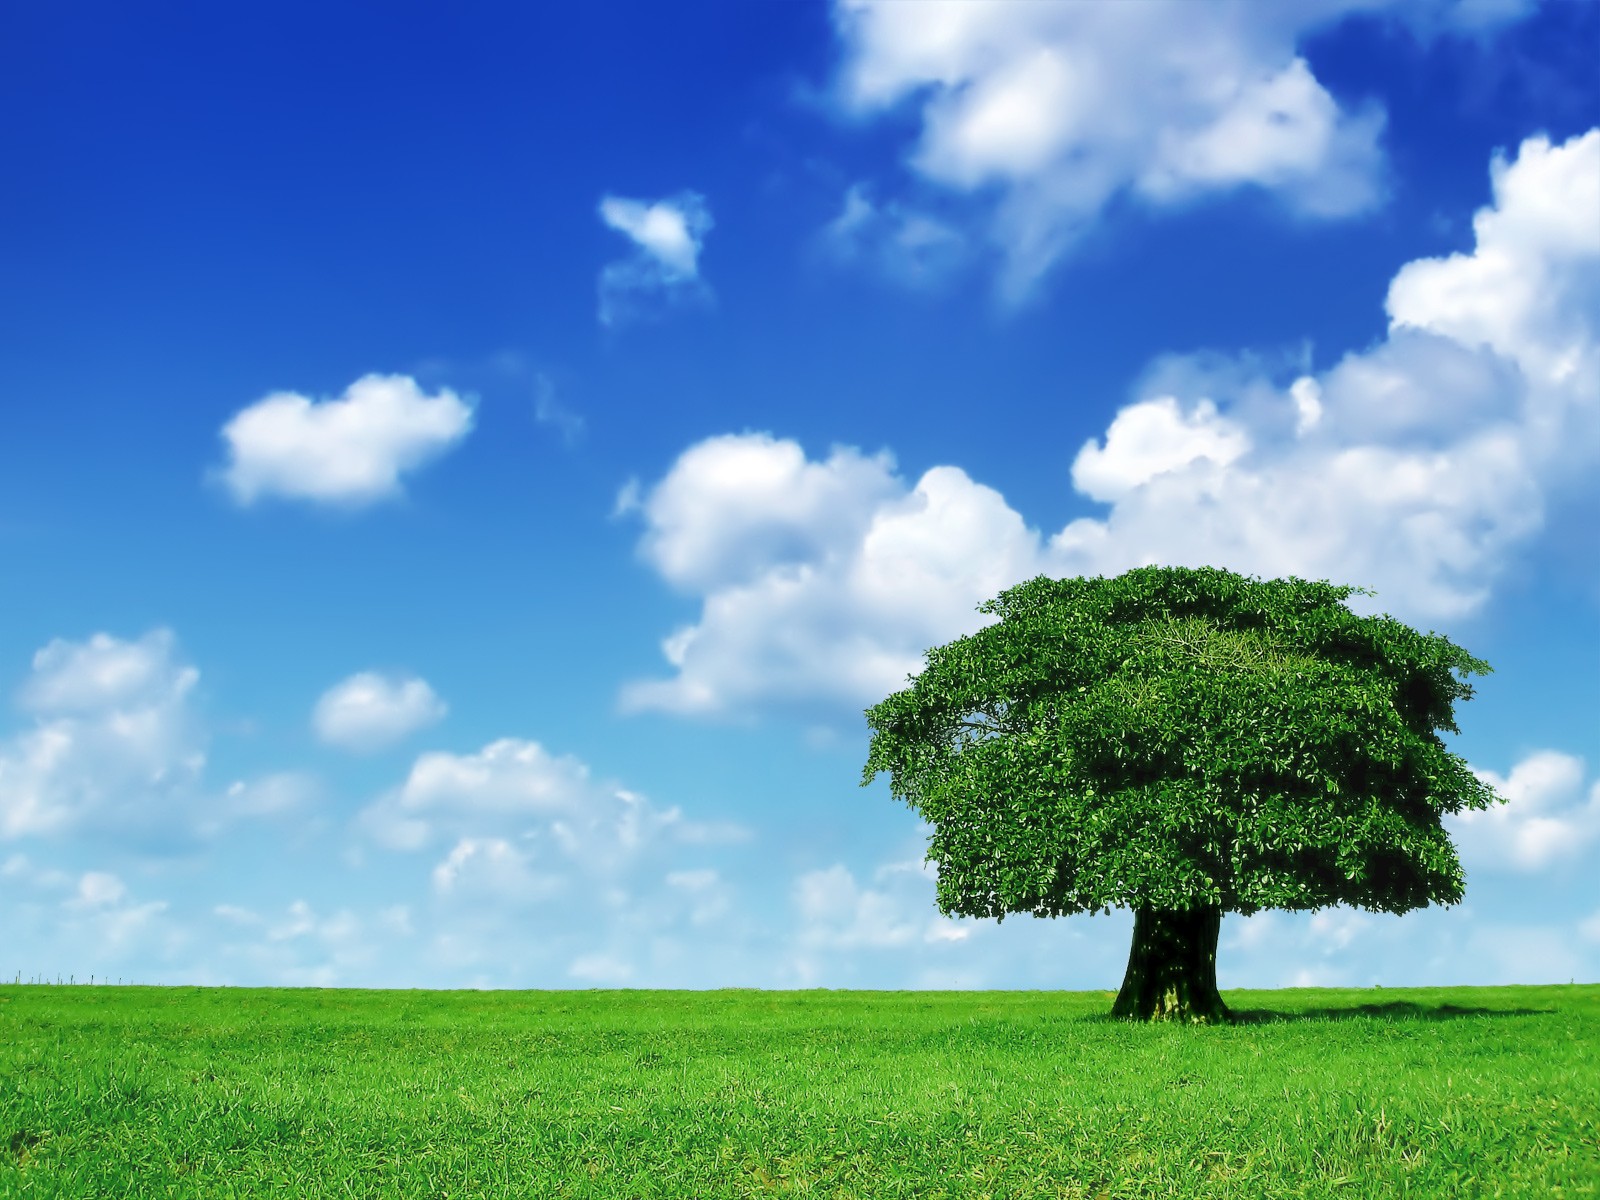 grass images Grass_Sky_Tree HD wallpaper and background photos ...